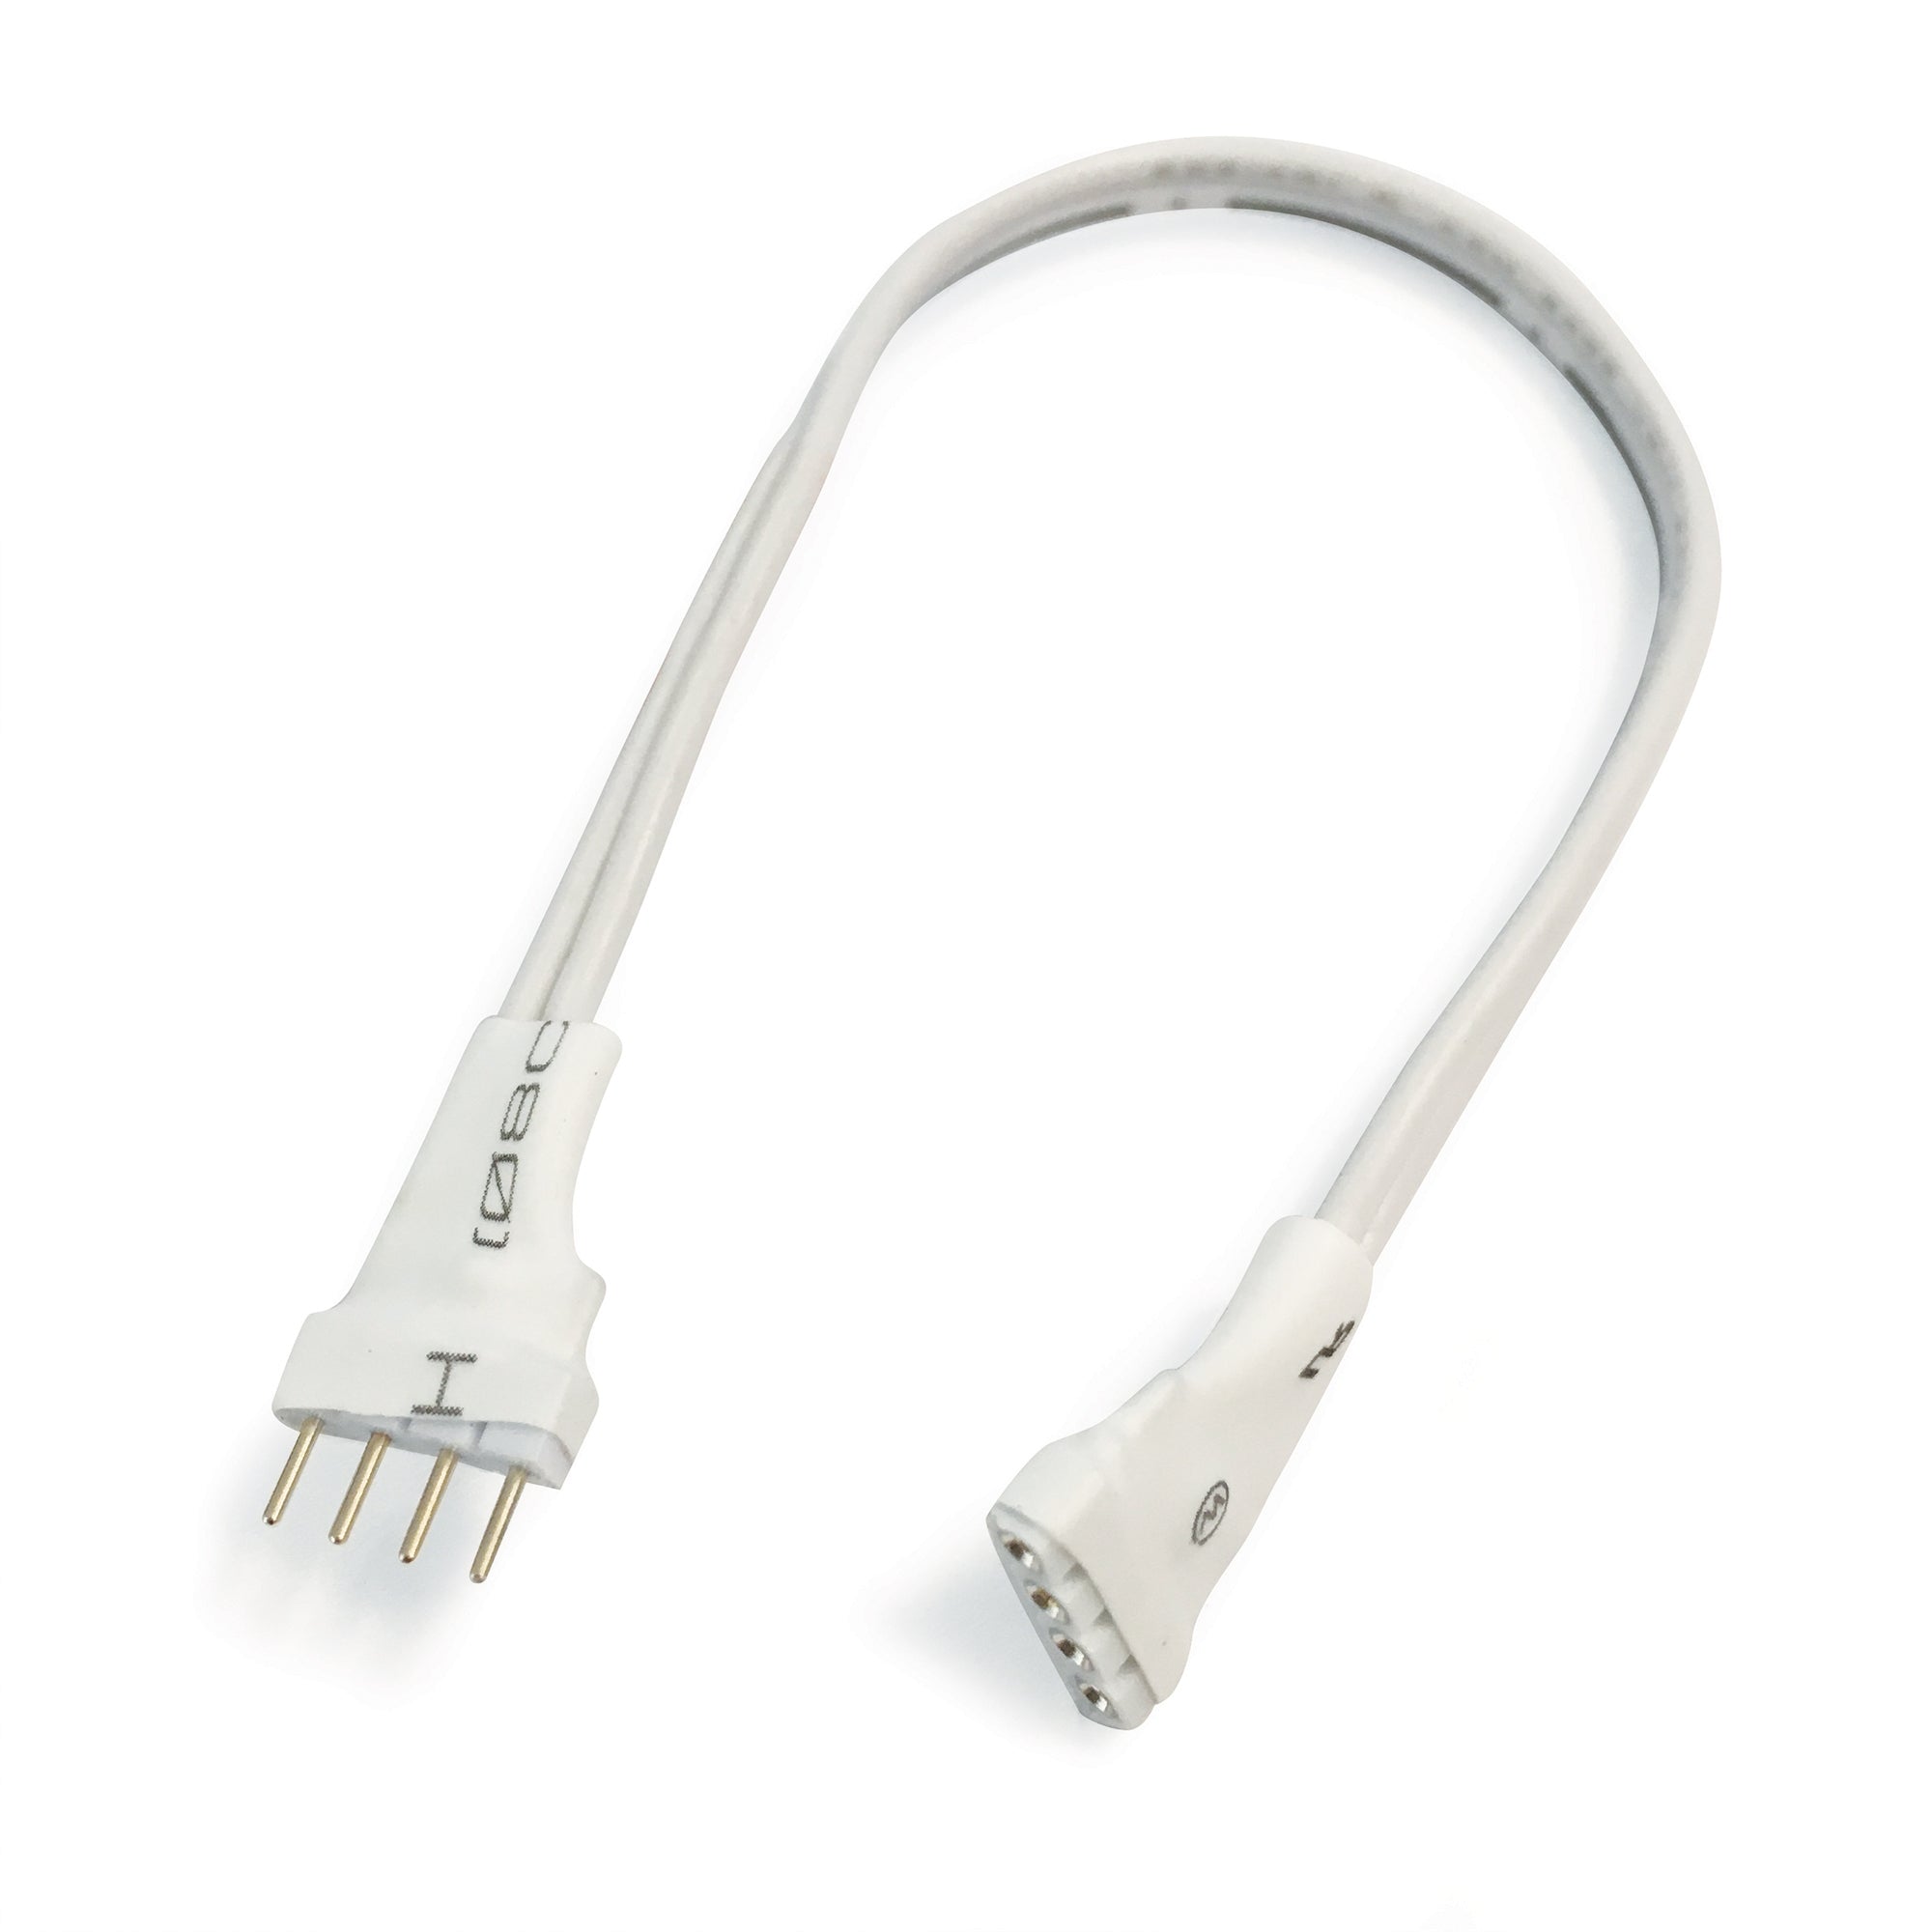 Nora Lighting NARGBW-918W - Accent / Undercabinet - 18 Inch Interconnection Cable for RGBW Tape Light